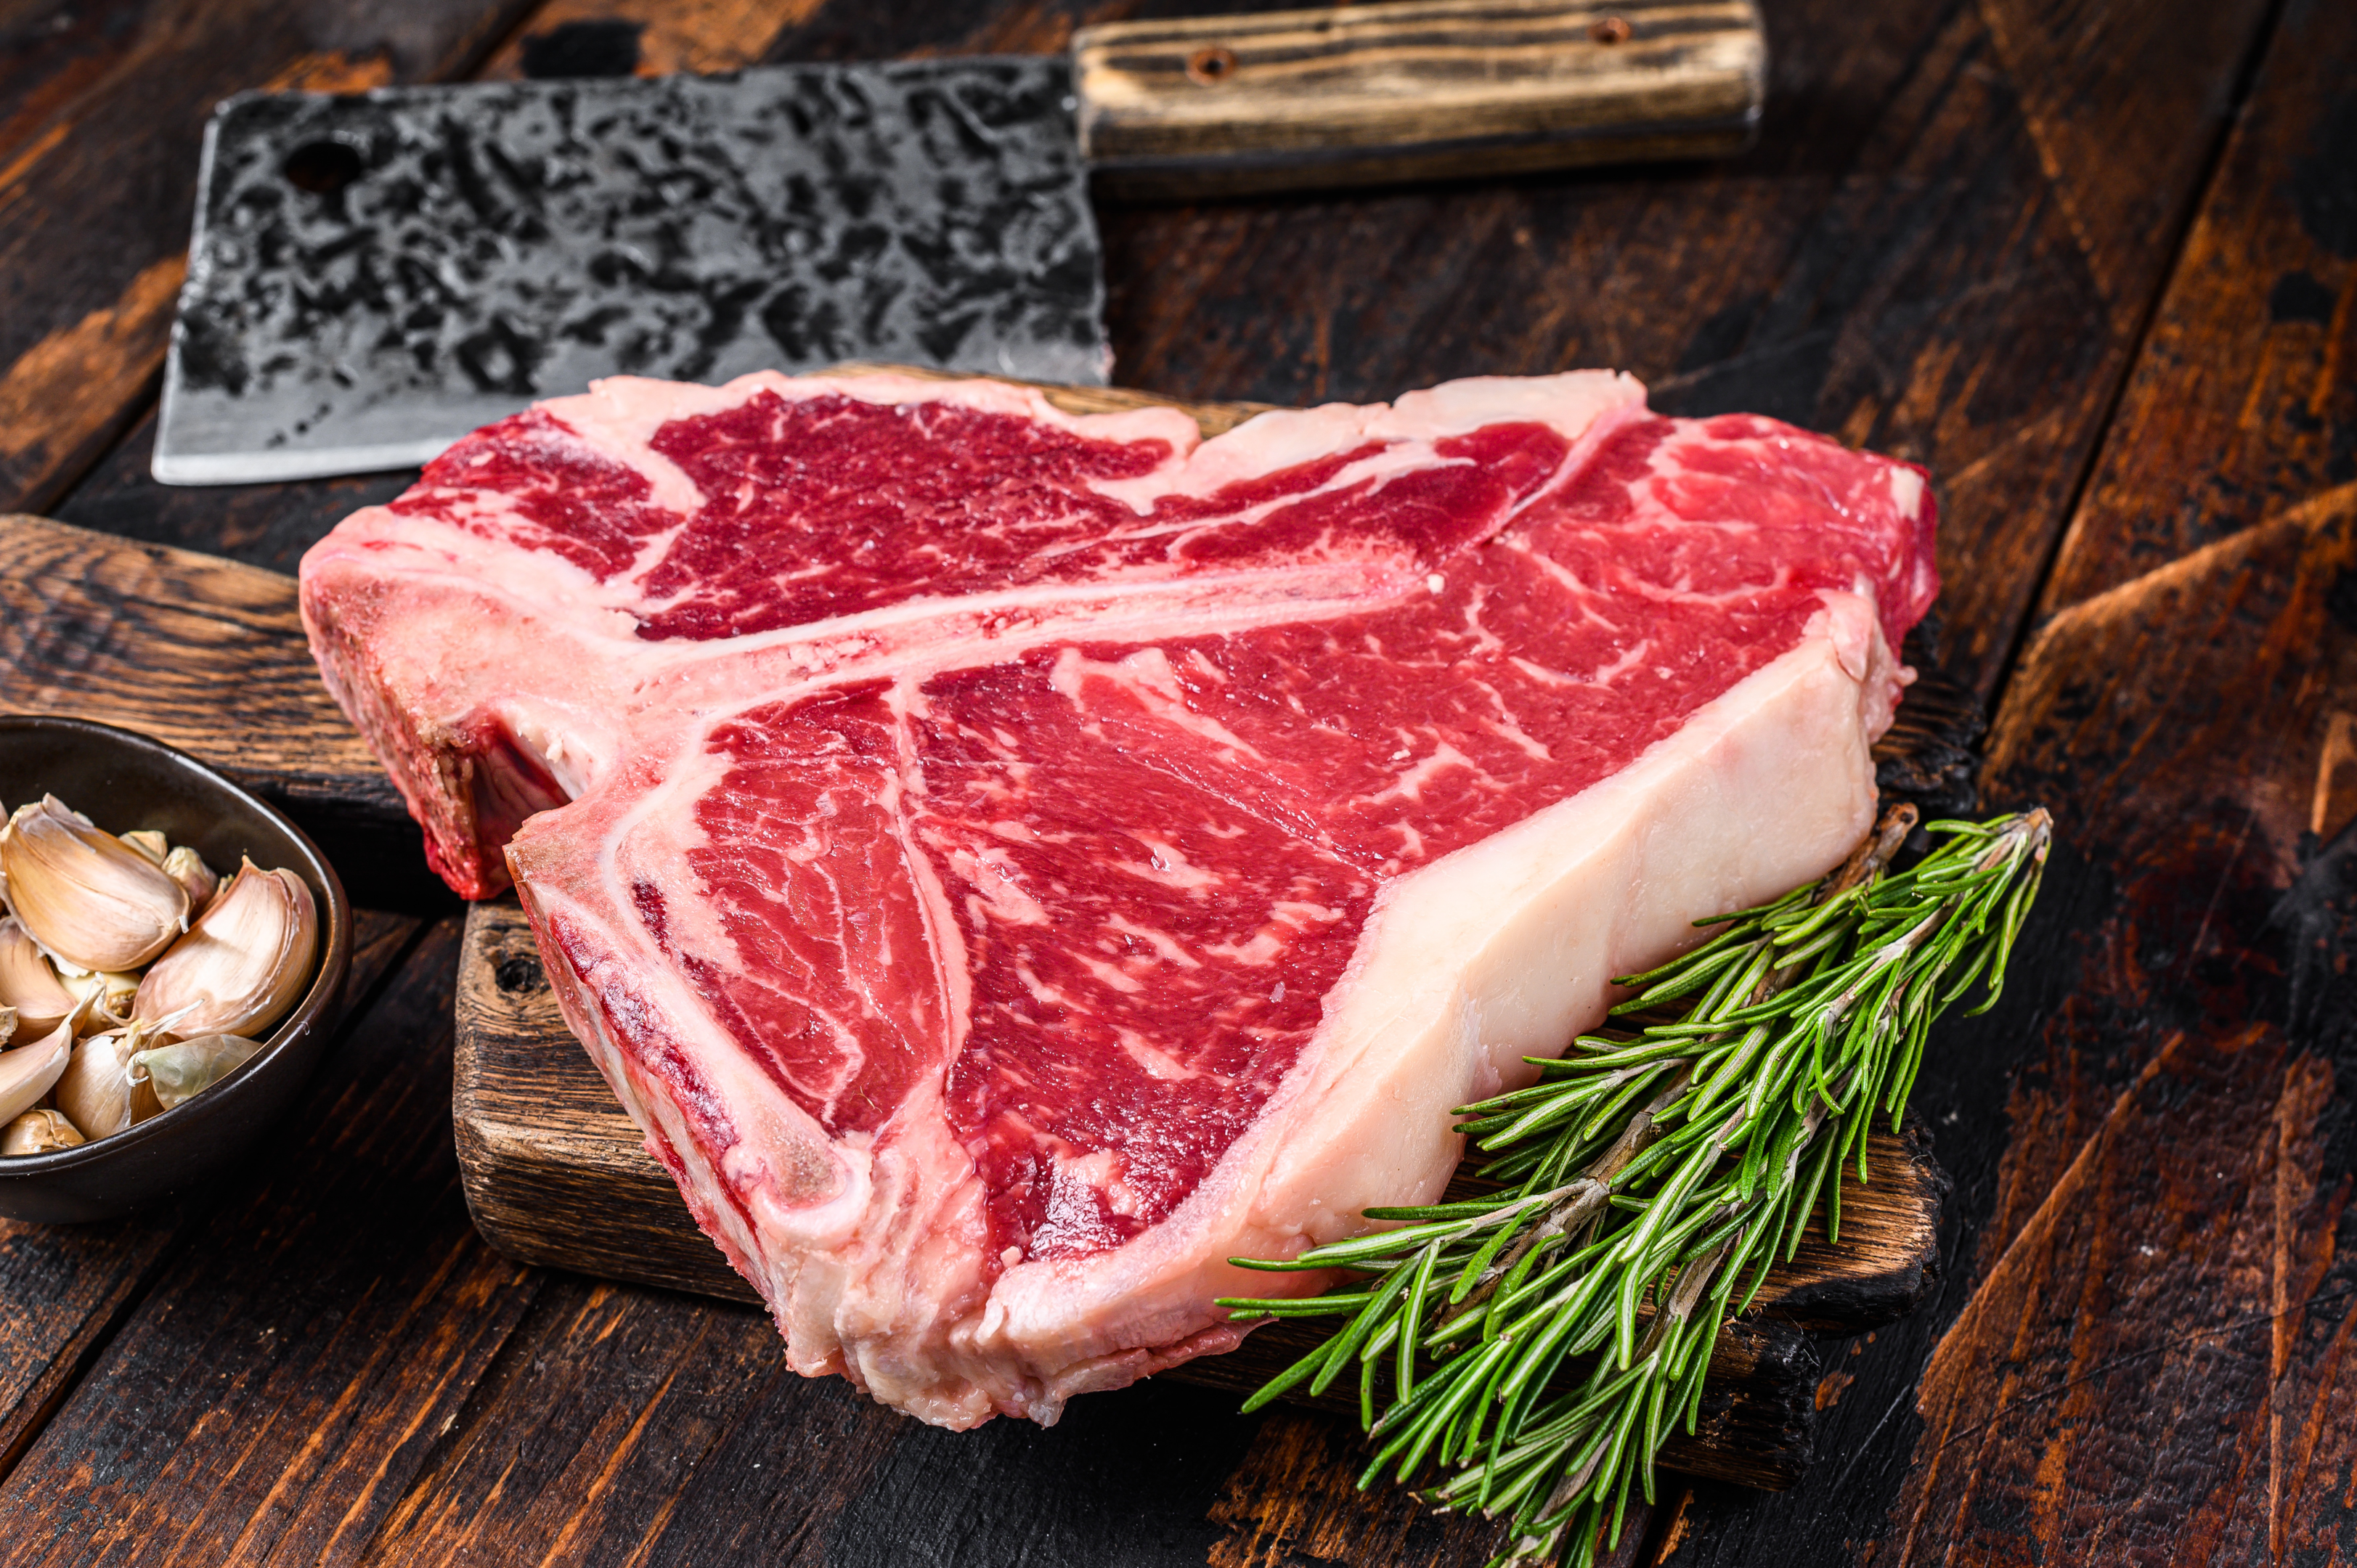 The Most Common Steak Cuts, From Worst to Best – WagyuWeTrust